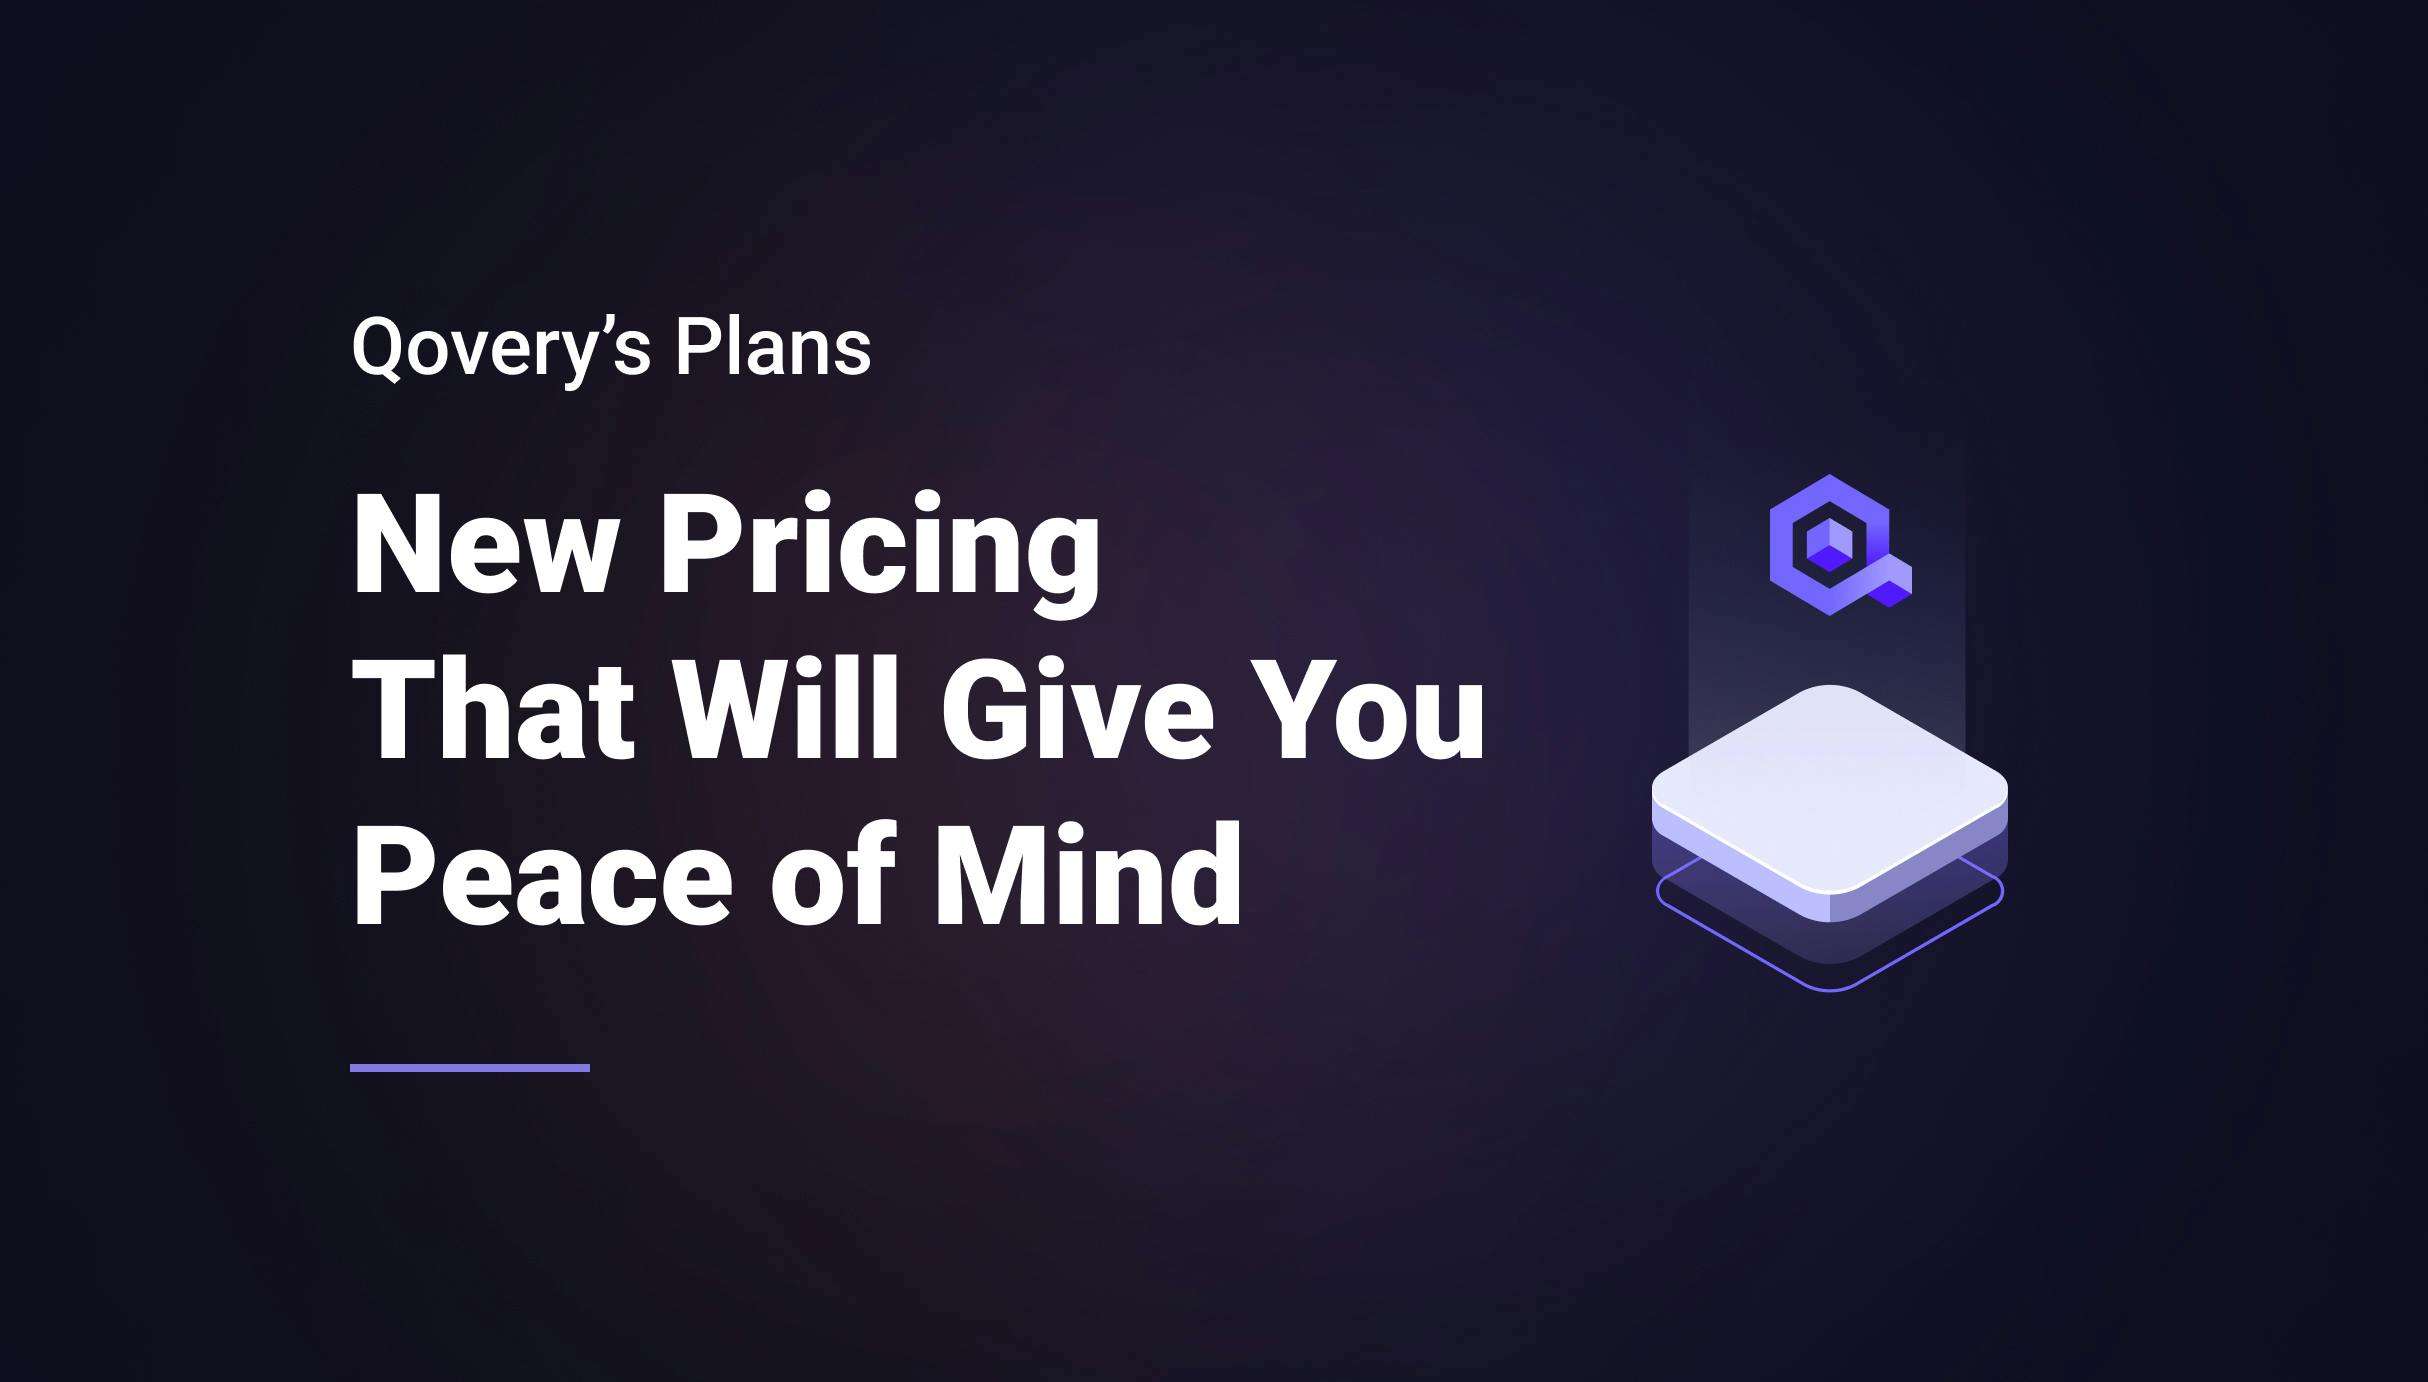 New Pricing that Will Give You Peace of Mind - Qovery